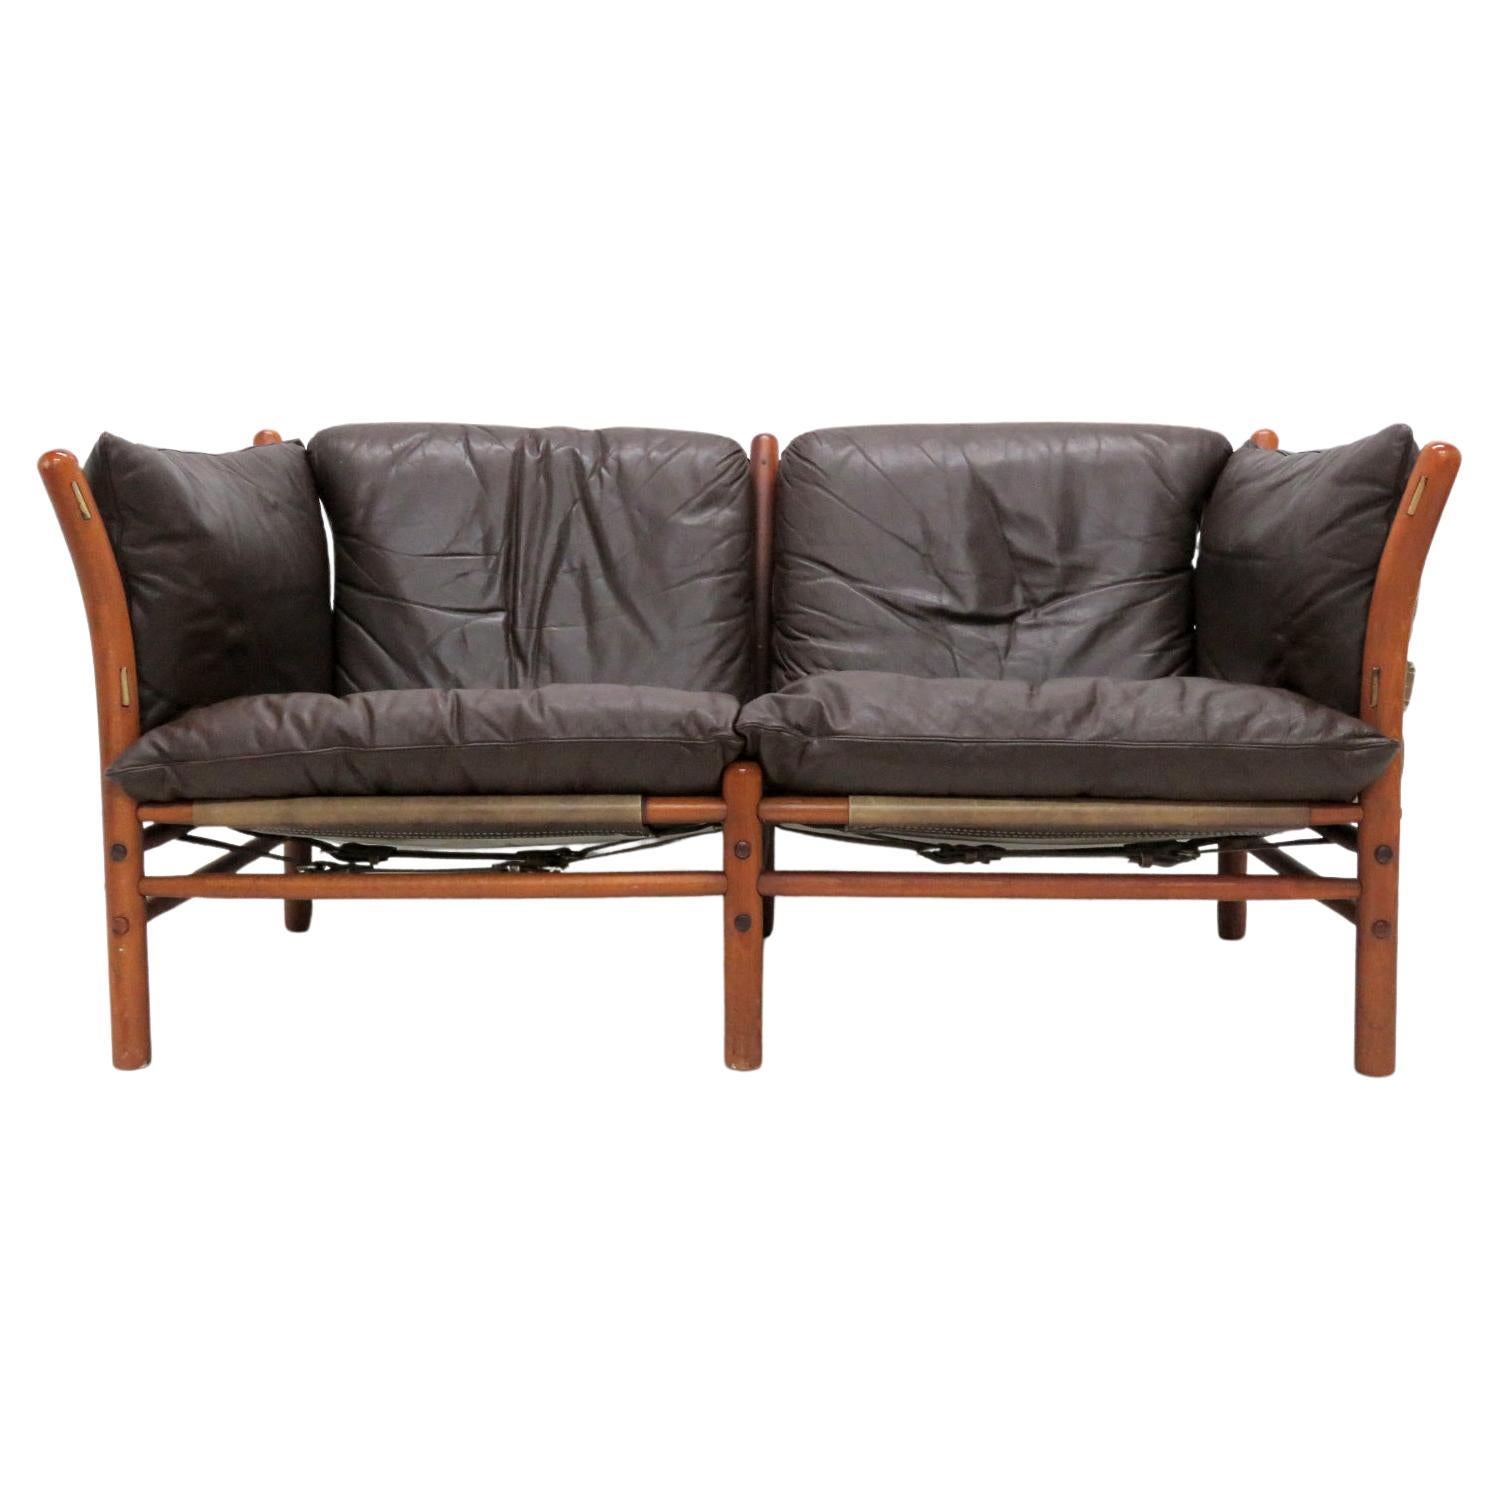 Leather Settee Model ‘Ilona’ by Arne Norell, 1960 For Sale